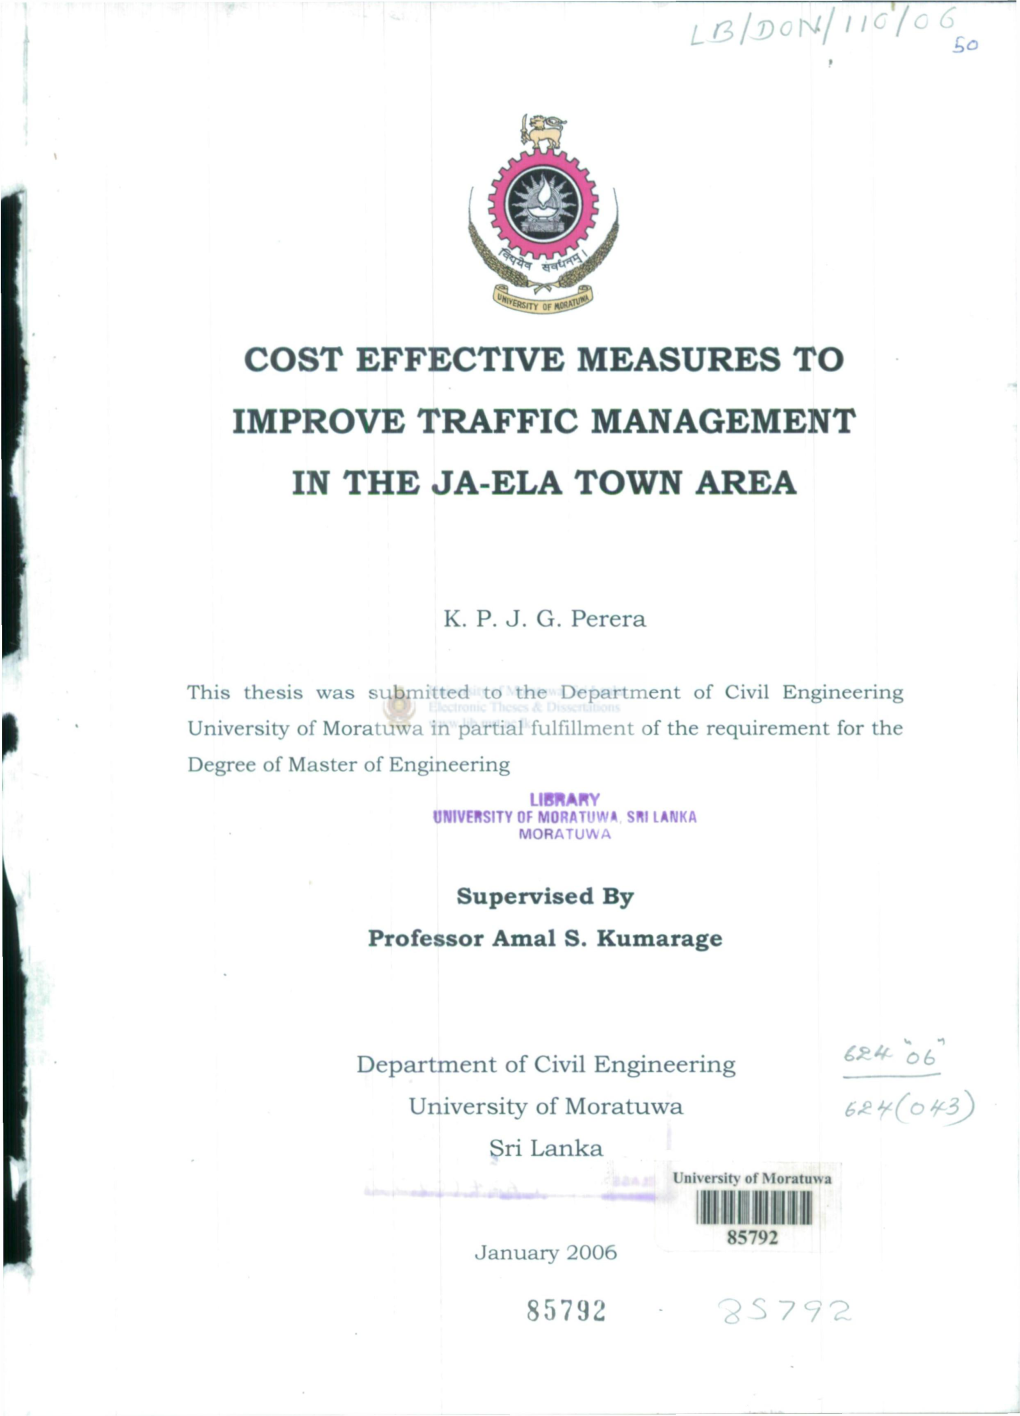 Cost Effective Measures to Improve Traffic Management in the Ja-Ela Town Area